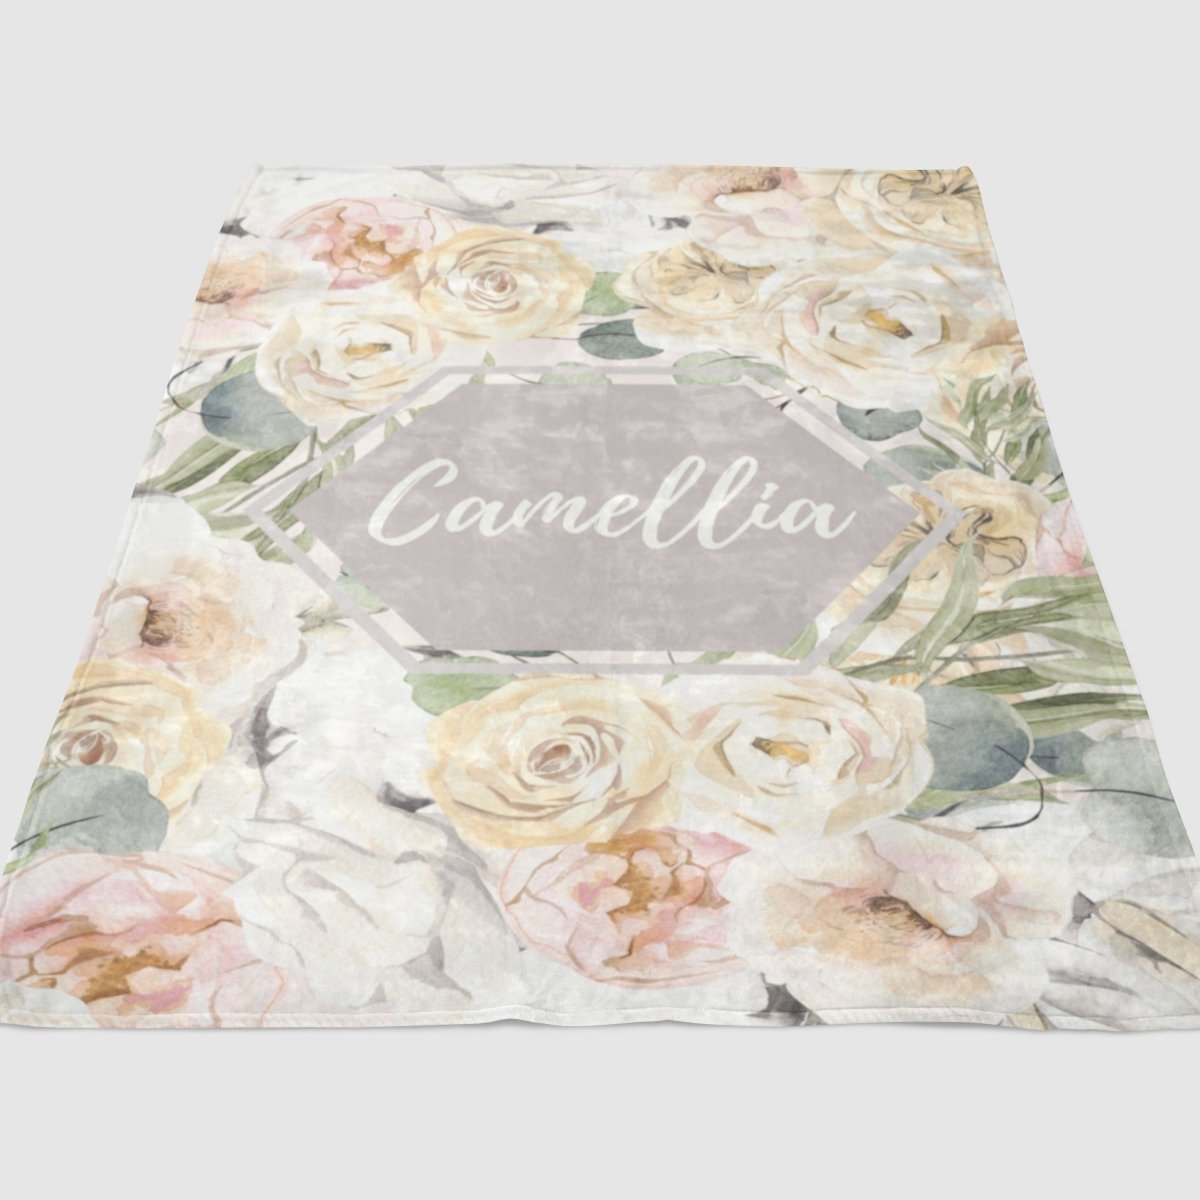 Farmhouse Floral Personalized Minky Blanket - Farmhouse Floral, gender_girl, Personalized_Yes